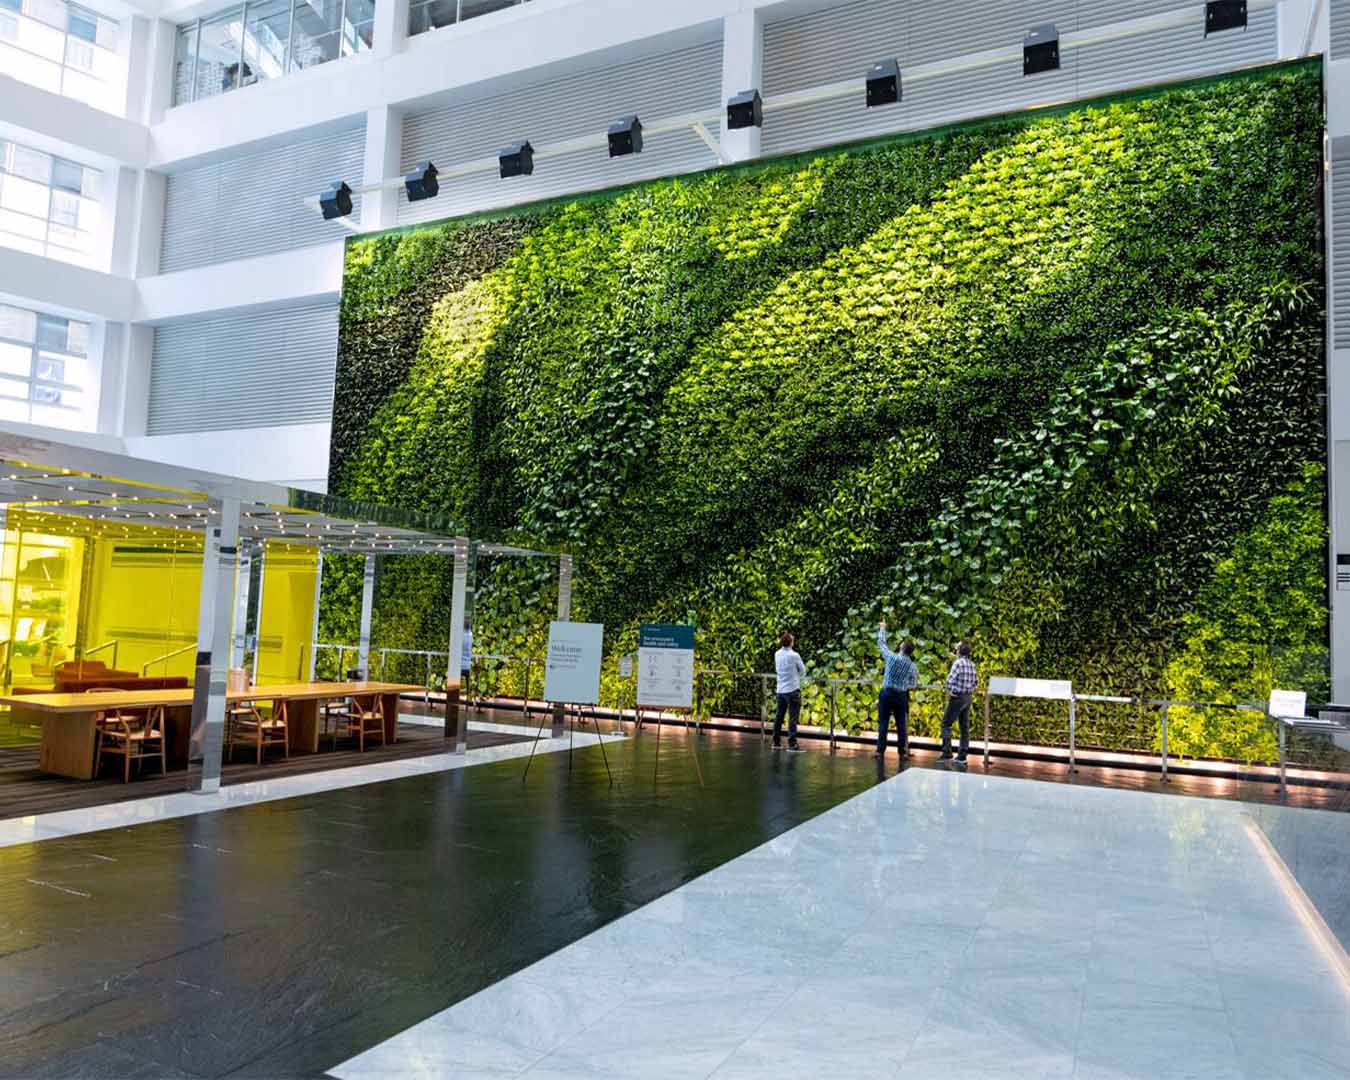 Living wall in an atrium building